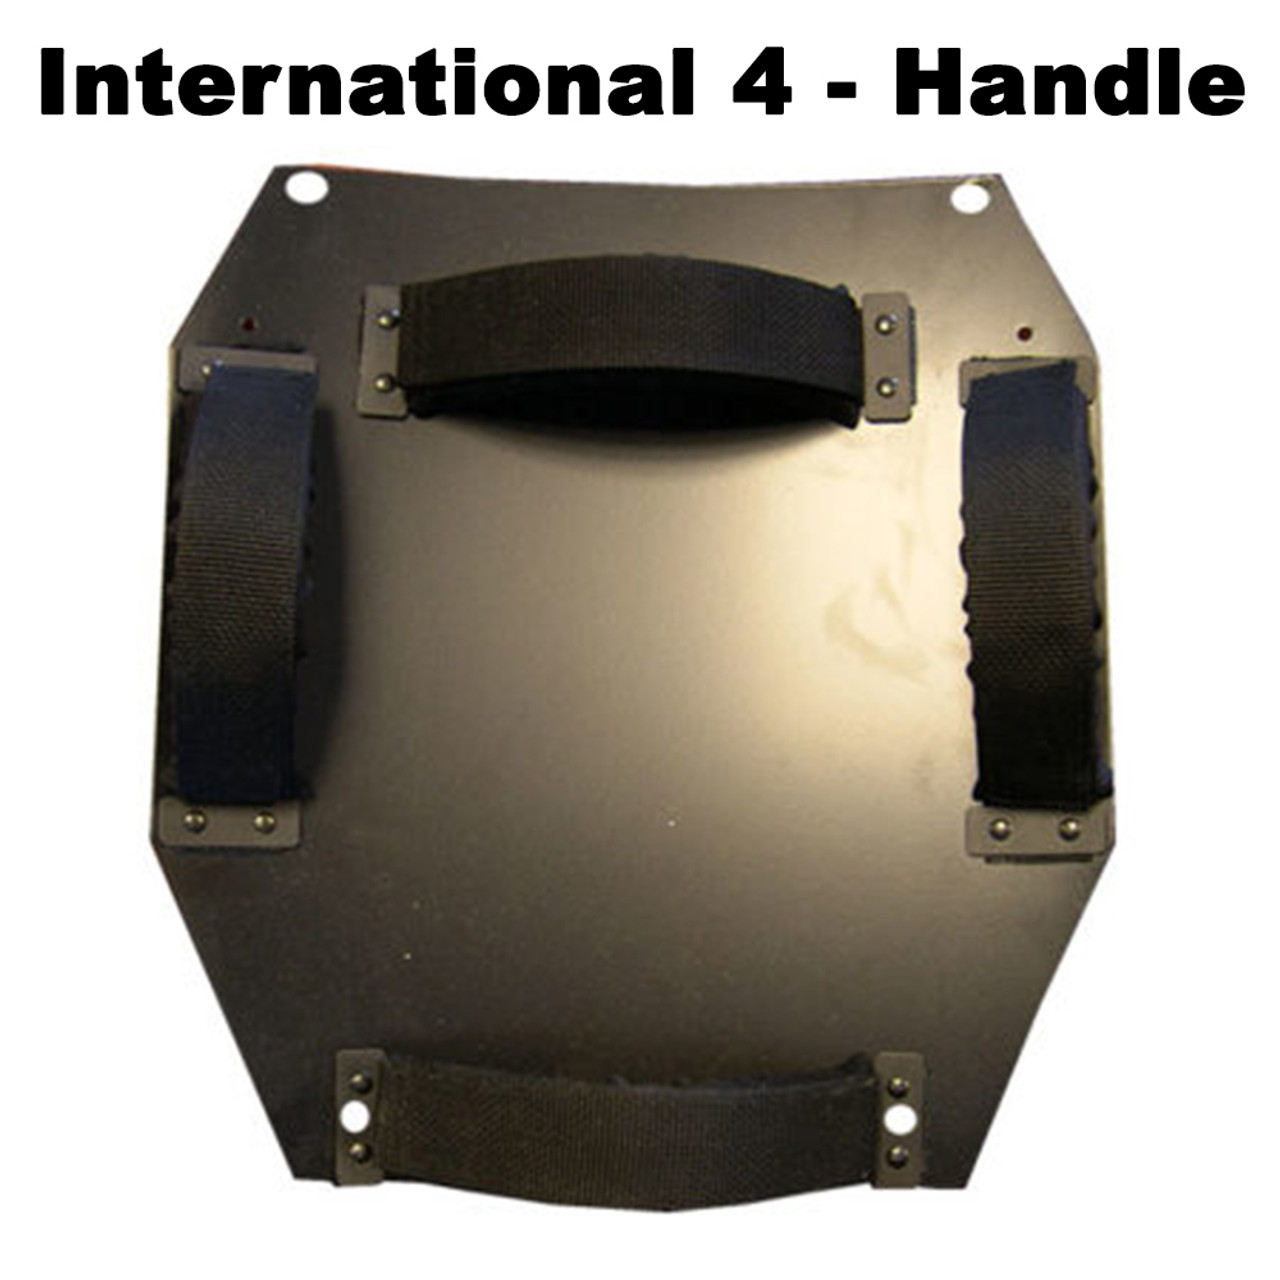 United Shield Standard Ballistic Shield, NIJ Level IIIA Protection, Optional 4" x 16" Viewport, Led light, multiple sizes available, for Military and Law Enforcement